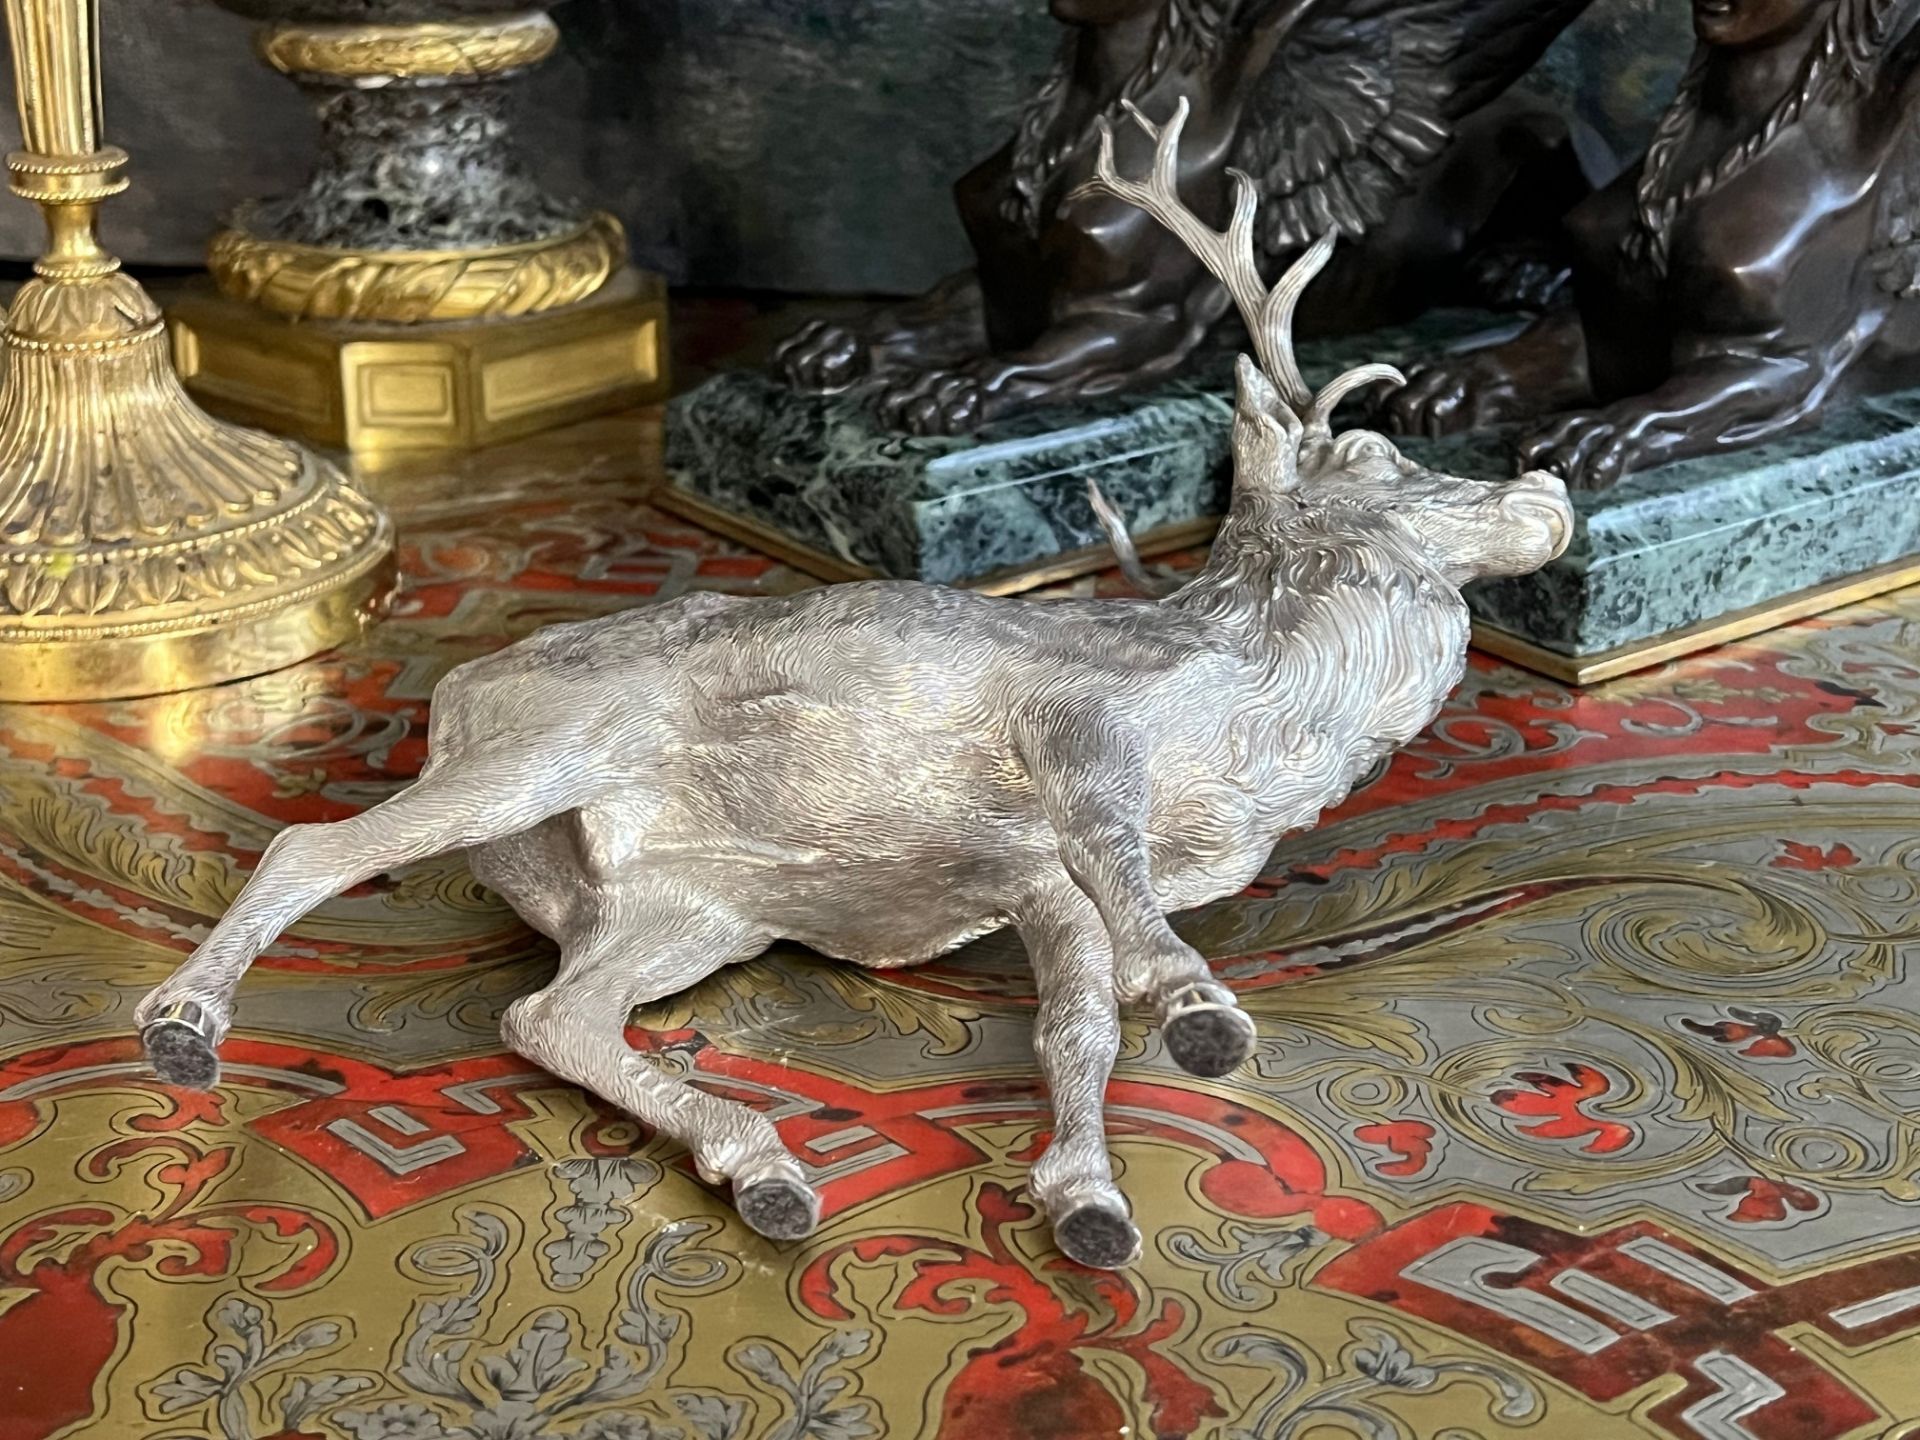 A FINE STERLING SILVER MODEL OF A STAG BY C.J. VANDER - Image 5 of 9